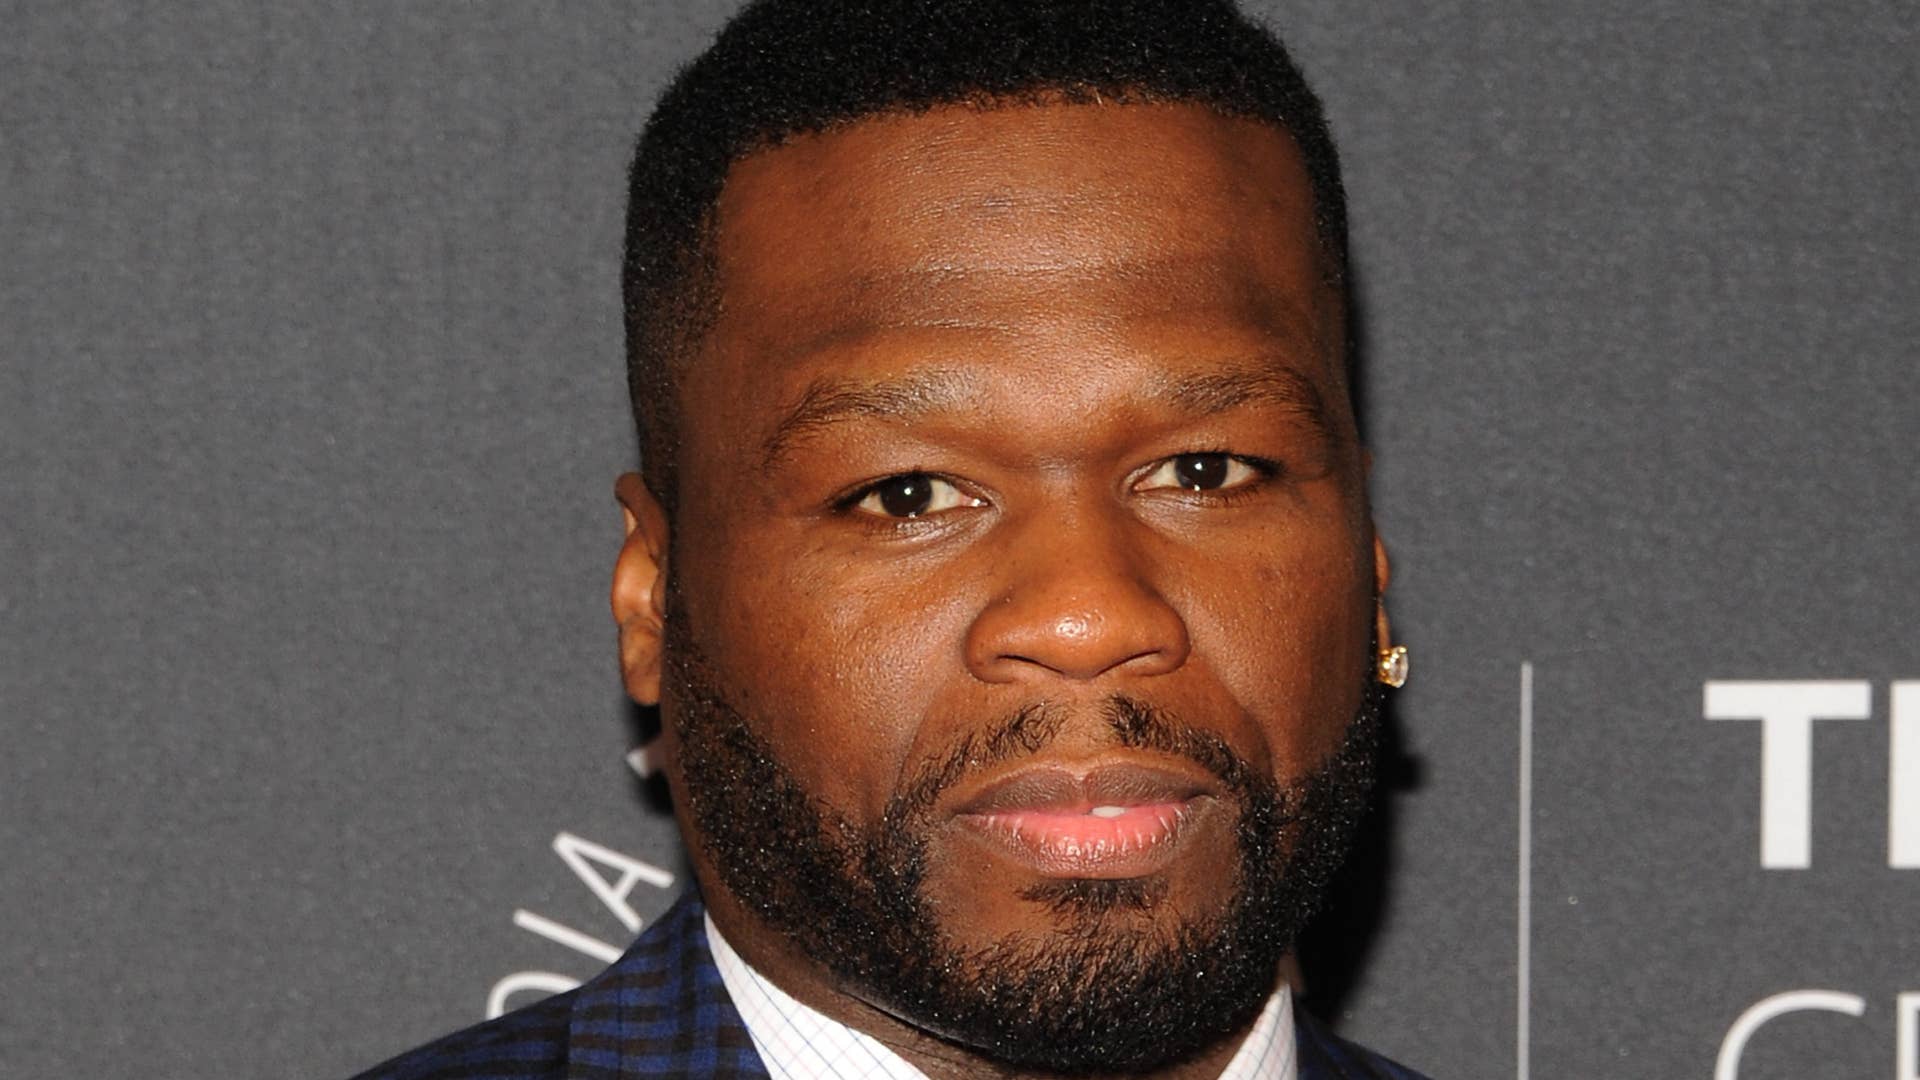 Curtis '50 Cent' Jackson attends PaleyLive NY presents an evening with the cast and creative team of 'Power.'